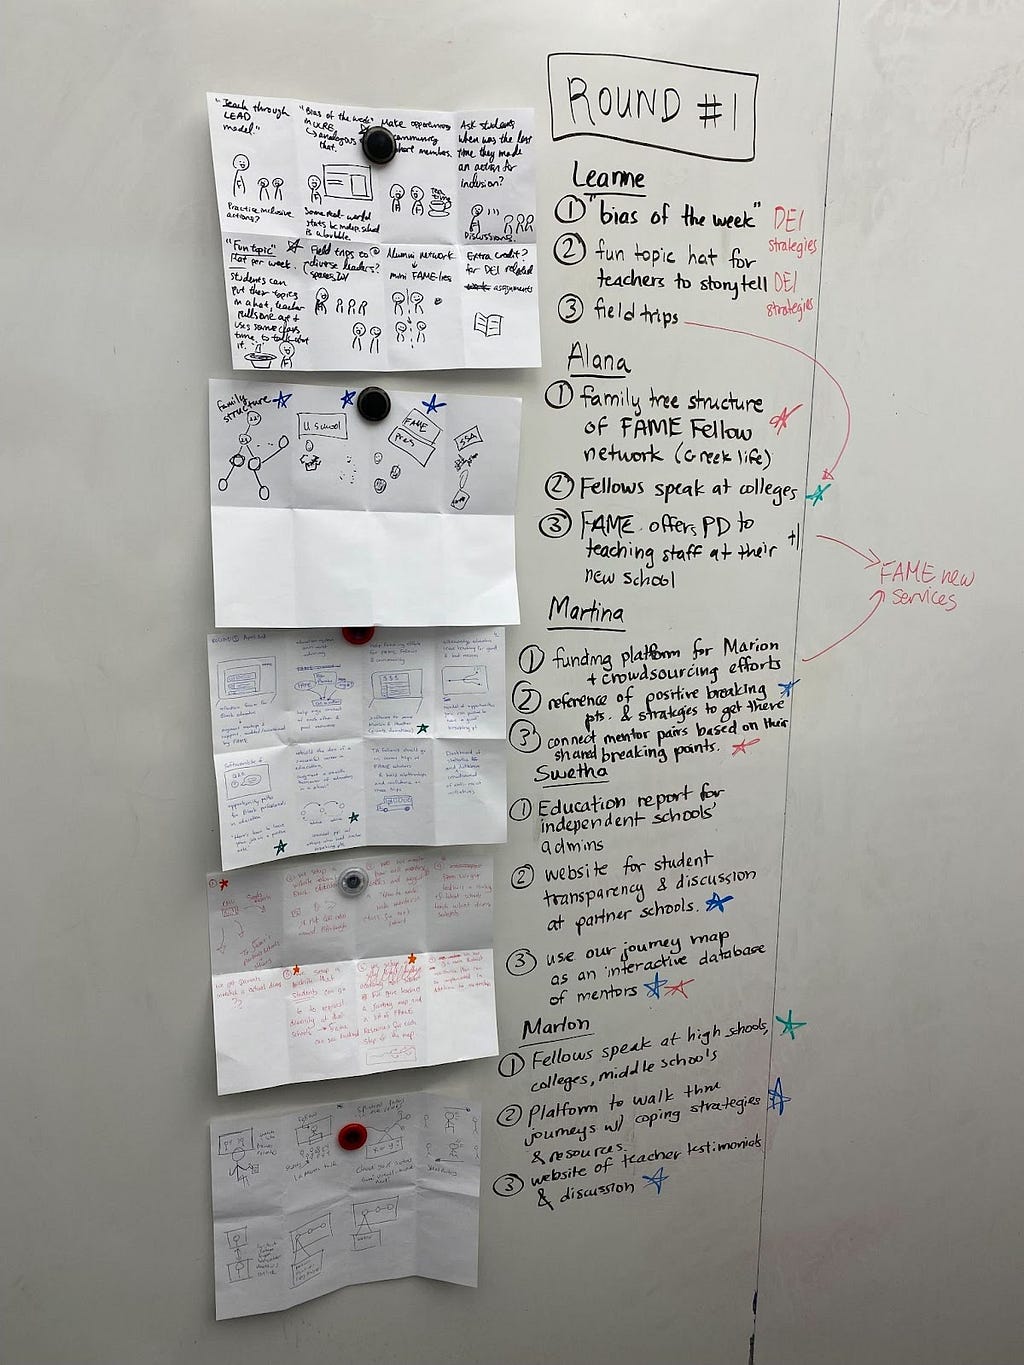 Five sheets of paper with hand-sketched ideas are magnetically pinned to a whiteboard, with additional notes written beside them.